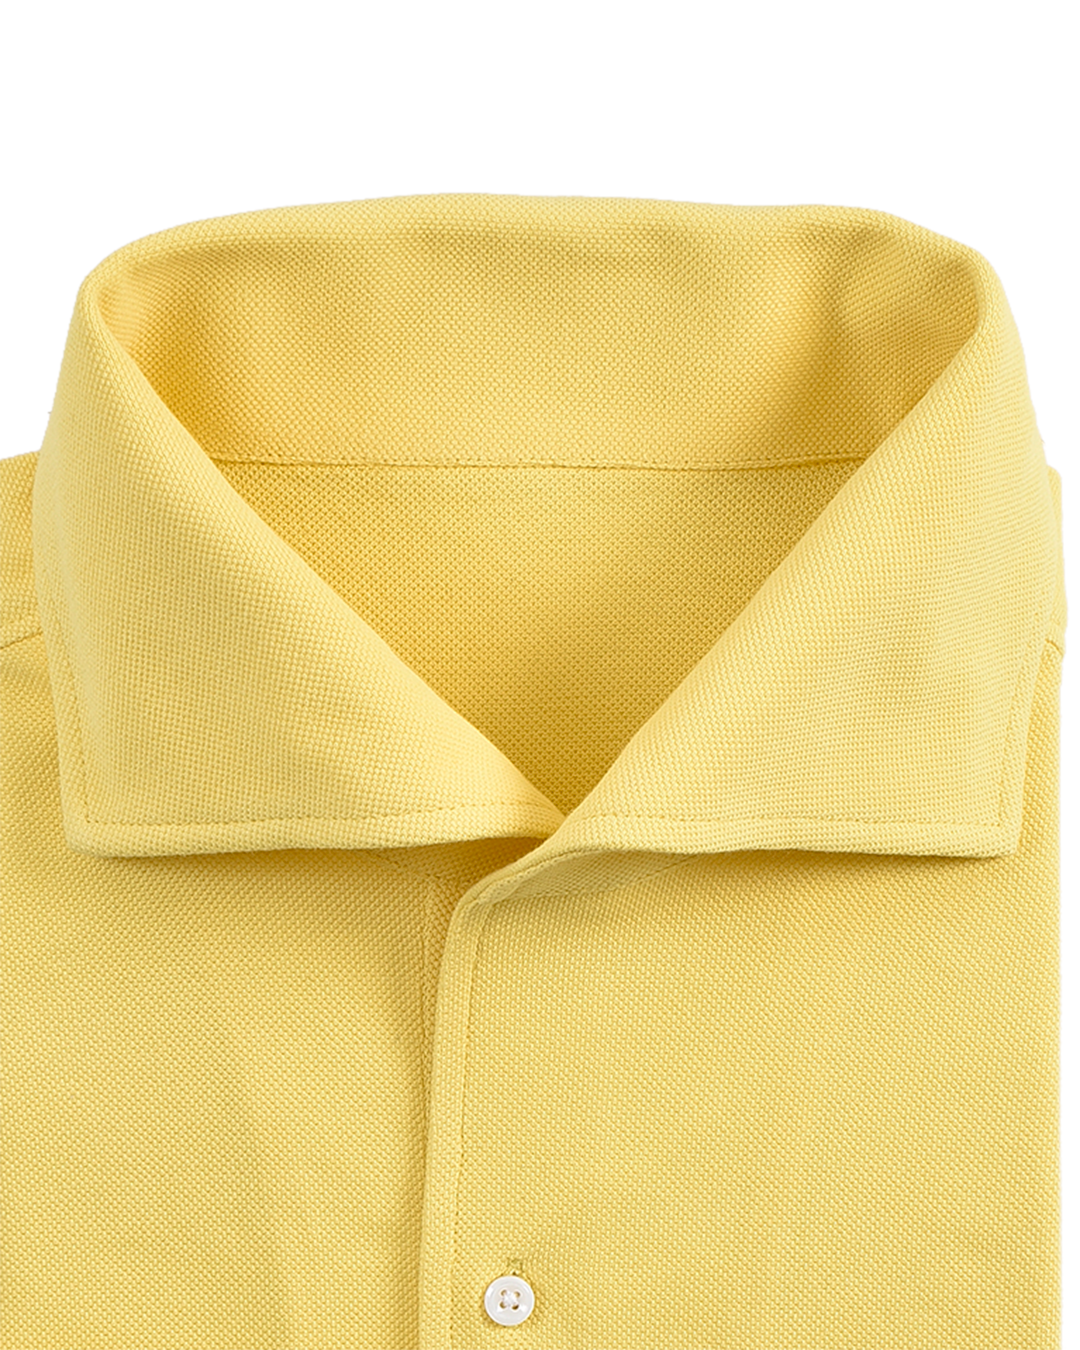 Collar of the custom oxford polo shirt for men by Luxire in light yellow